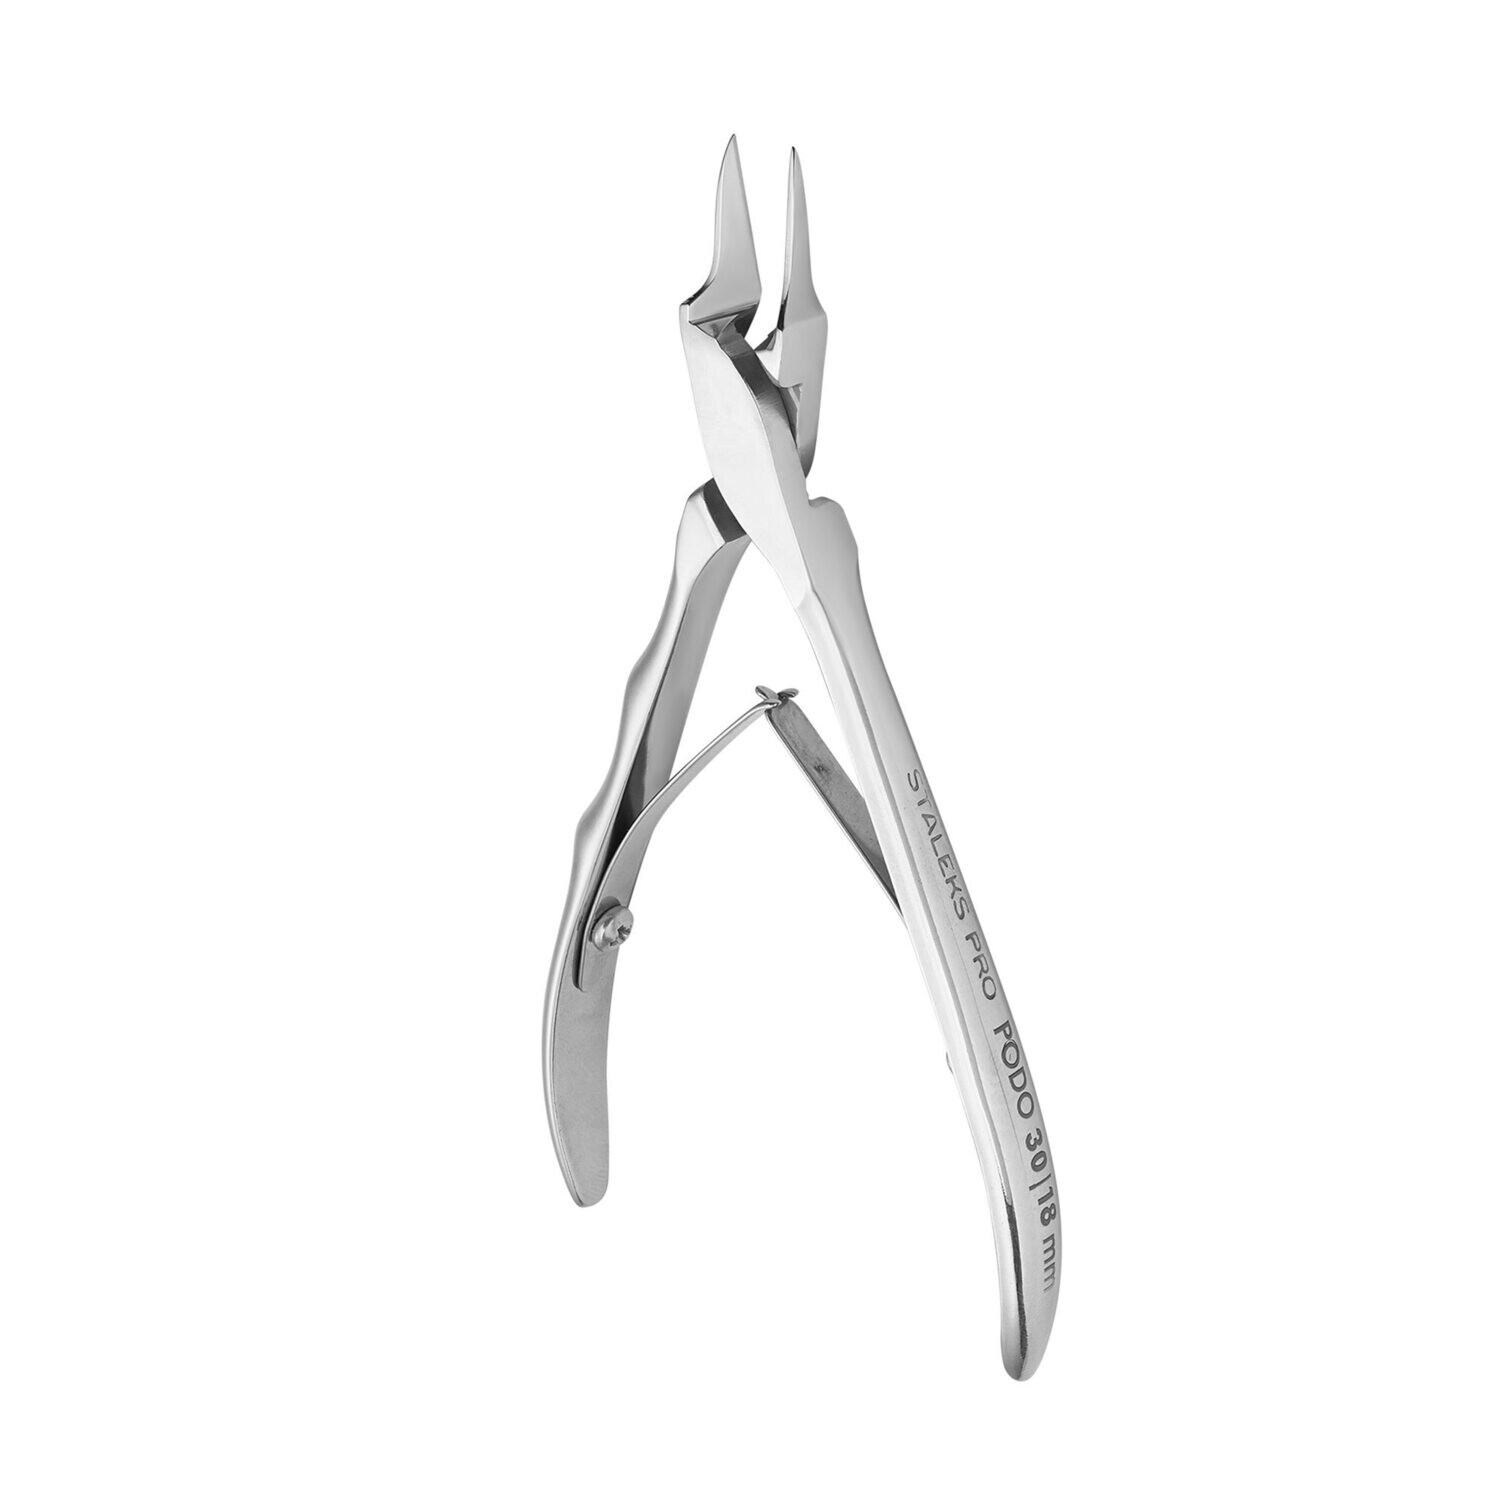 NIPPERS FOR INGROWN NAILS PODO 30 18 MM